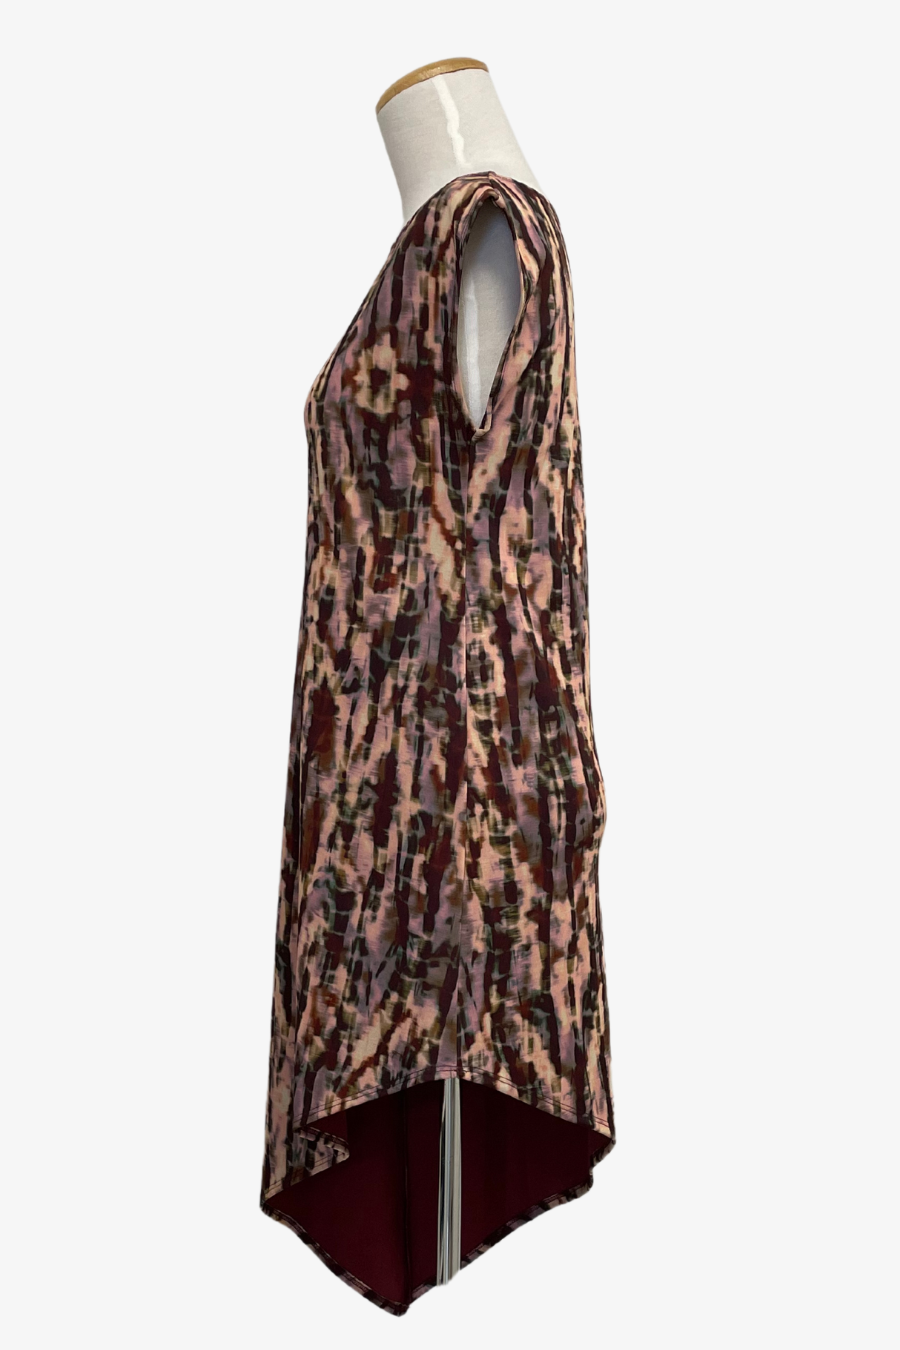 Thomas Tunic in Corteccia Print Fabric ONLINE ONLY